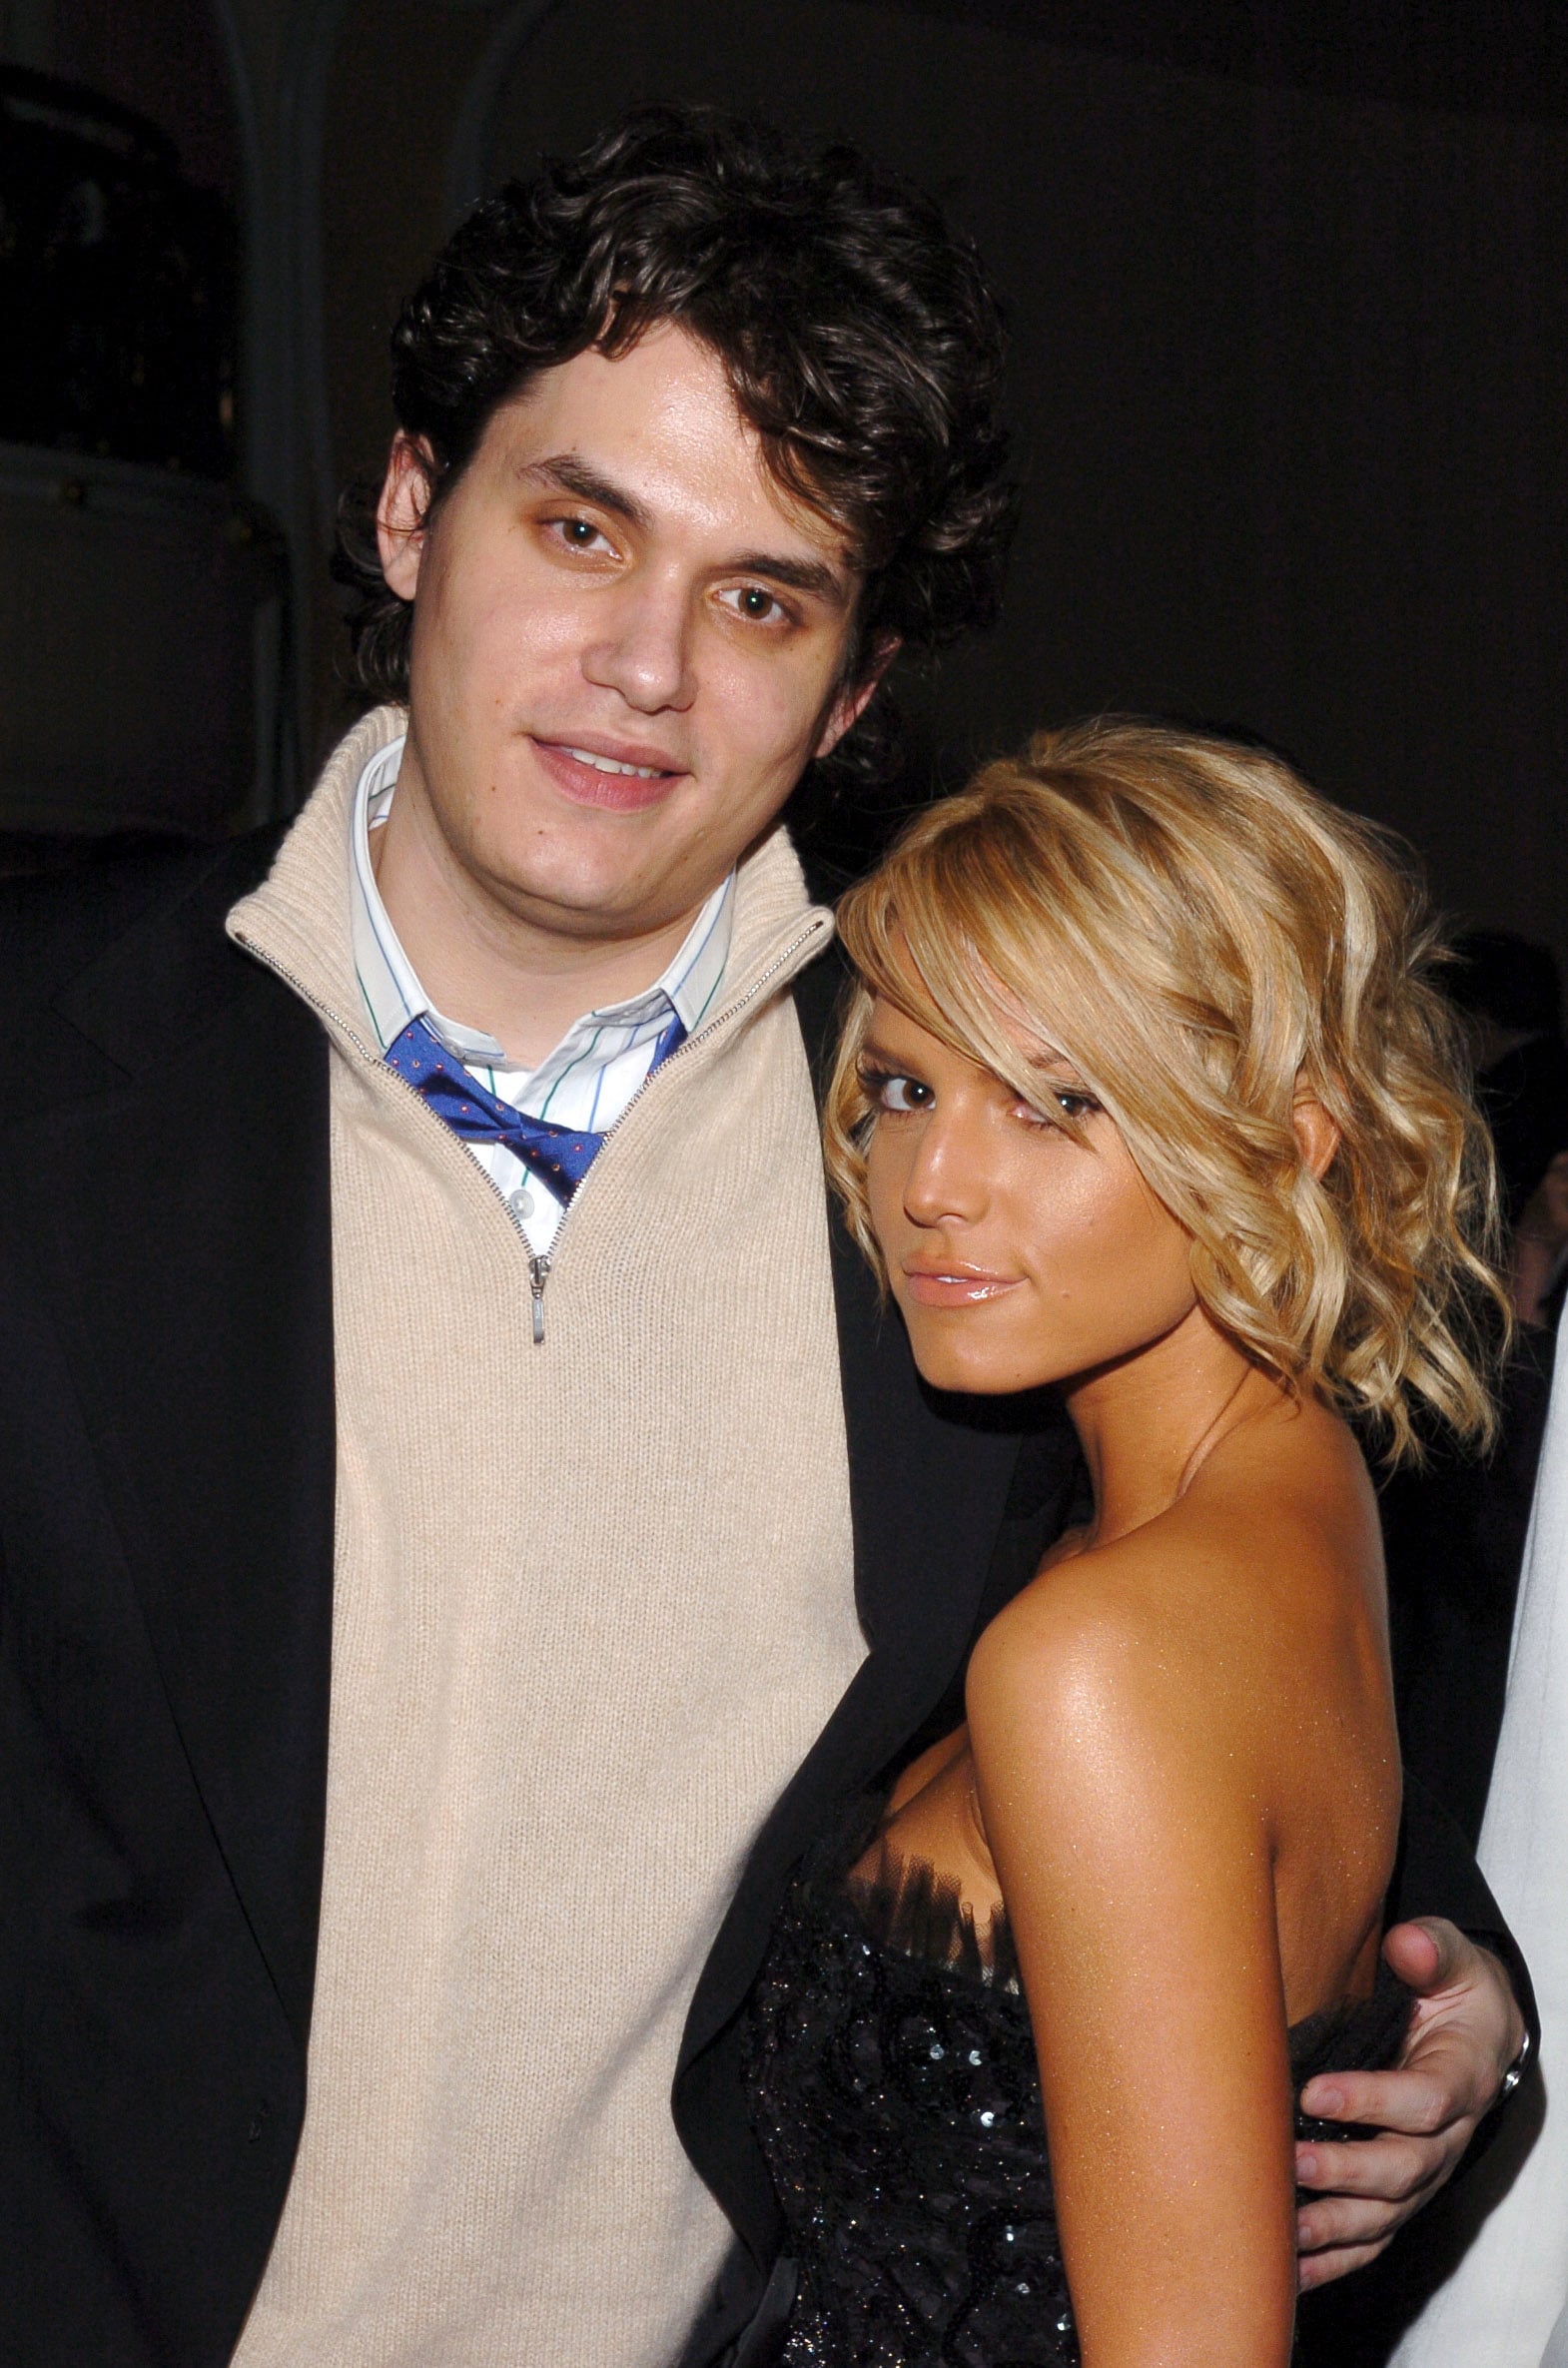 John Mayer posed with a very tan Jessica Simpson in 2005. One year later, they started dating.